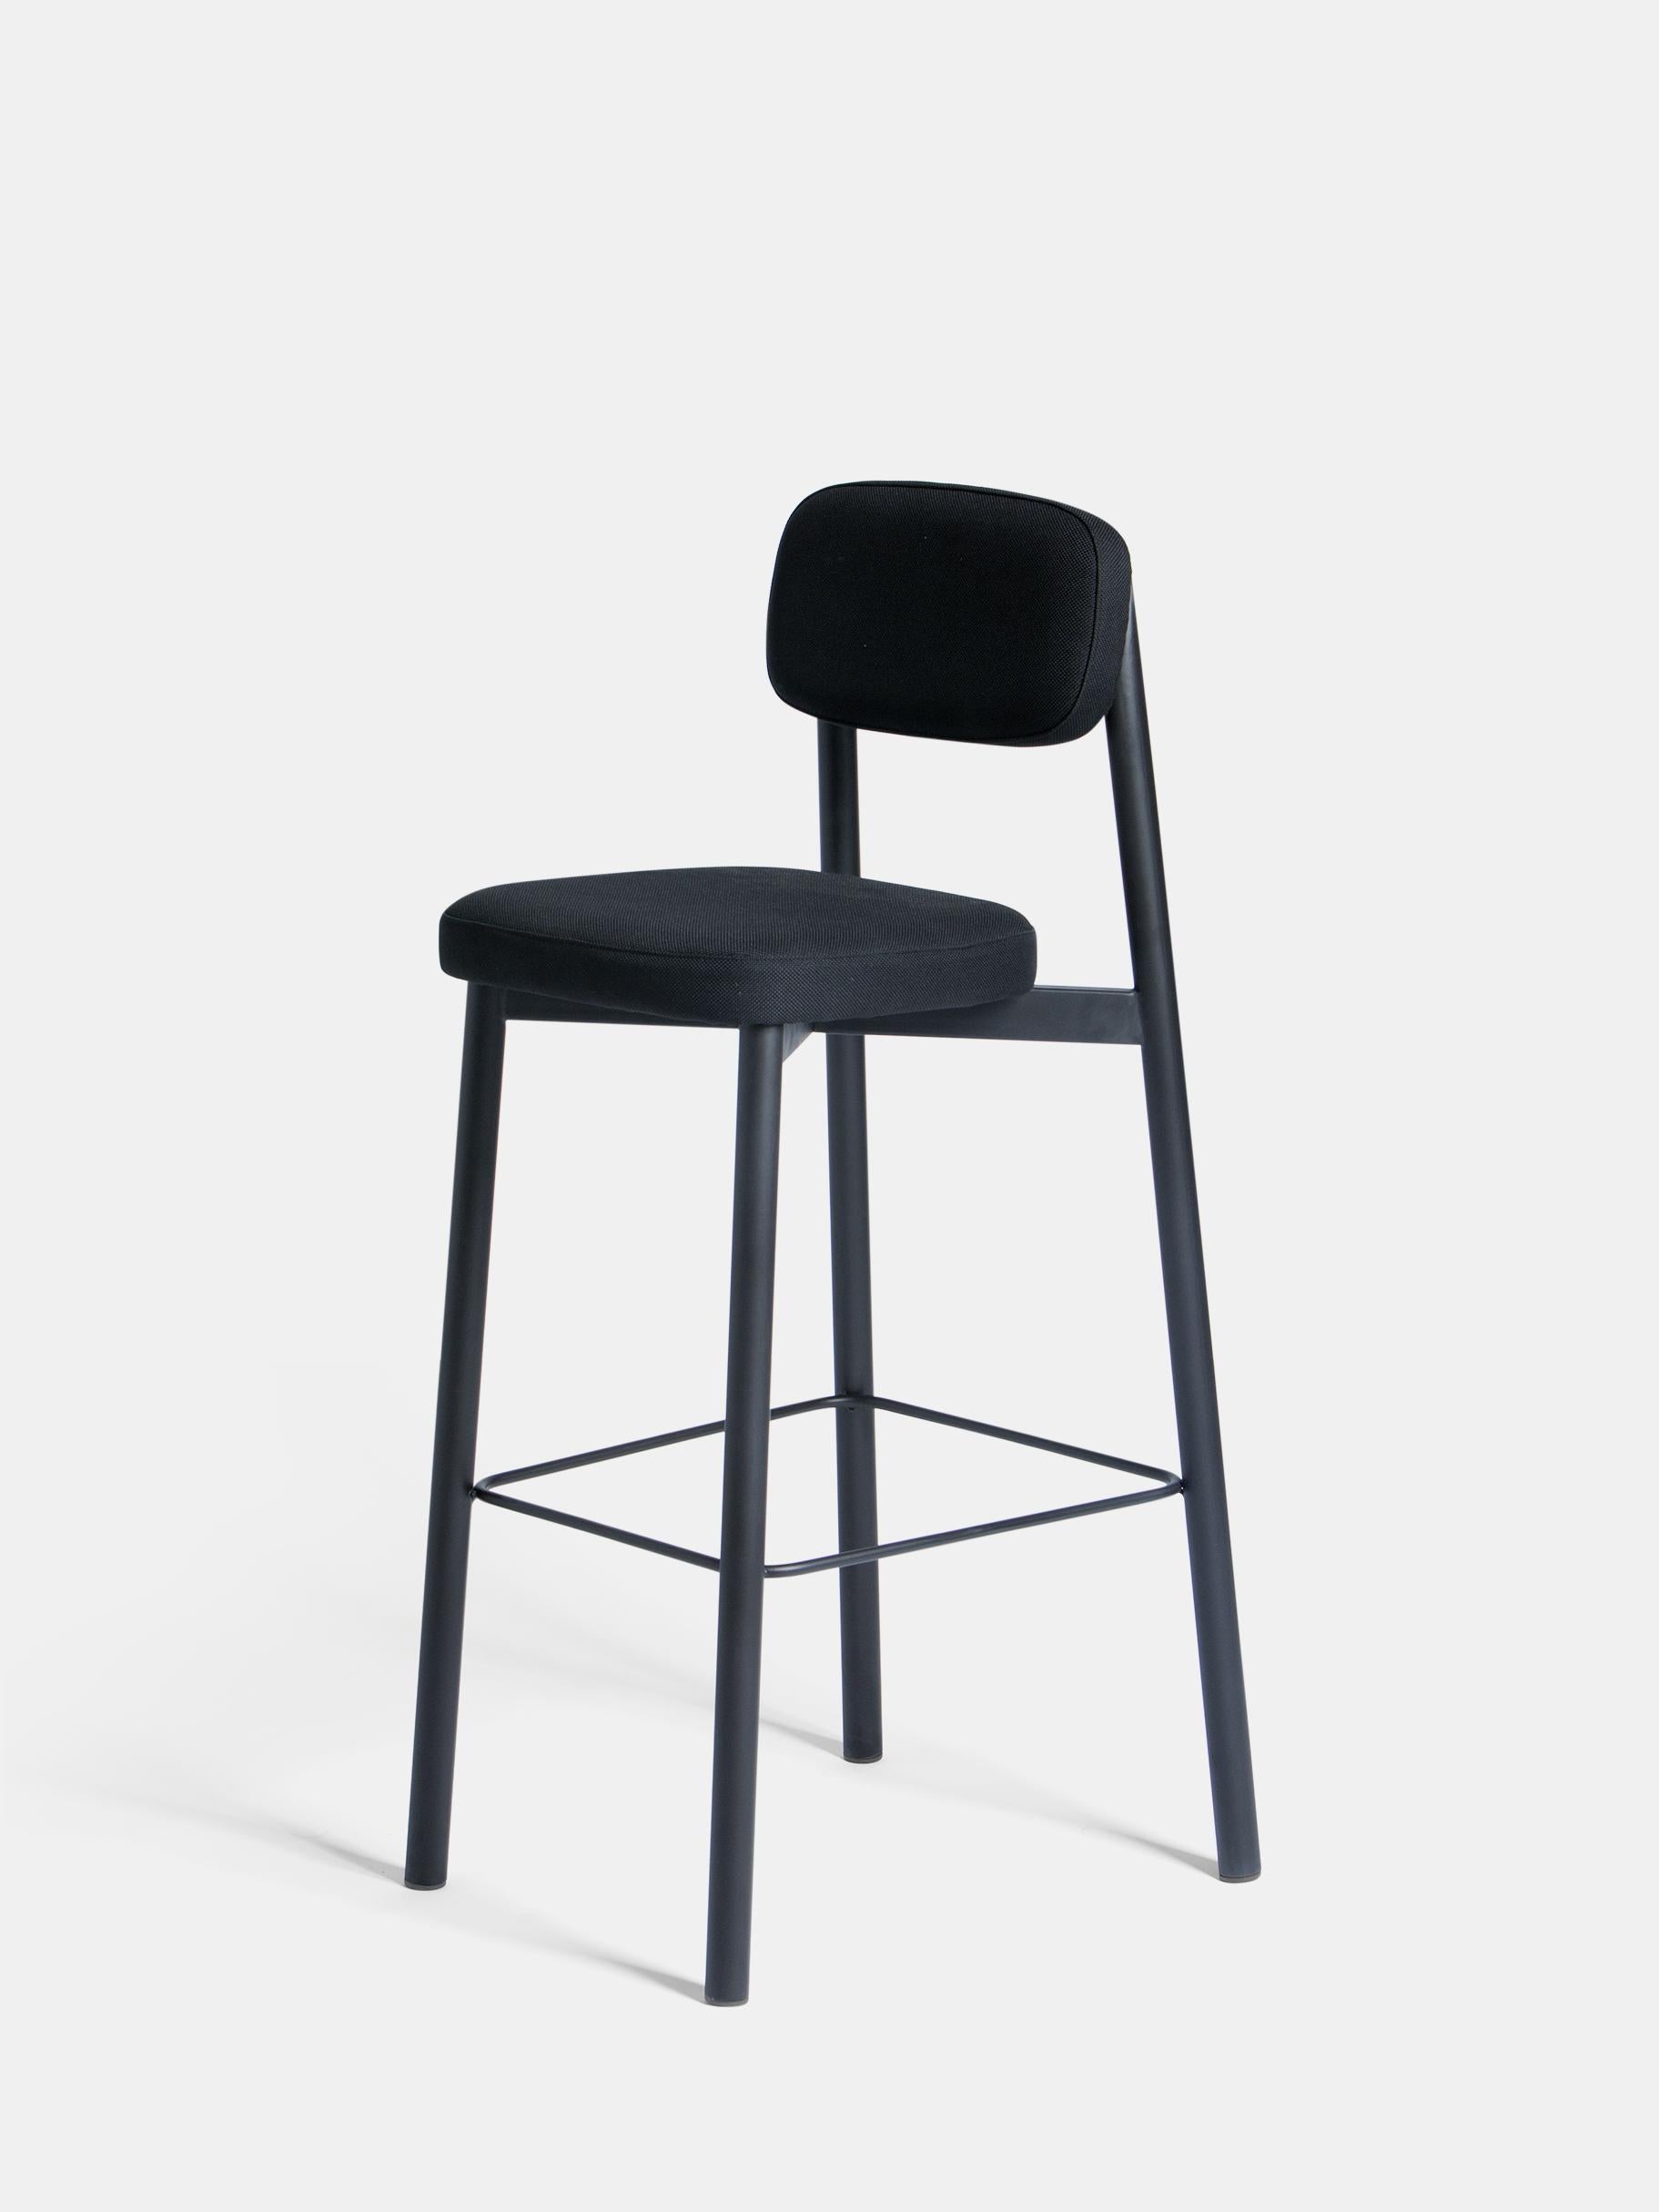 Set of 6 Black Residence 75 Counter Chairs by Kann Design
Dimensions: D 50 x W 46 x H 103 cm.
Materials: Steel tube, HR foam, fabric upholstery Kvadrat Relate 191 (100% Trevira).
Available in other colors.

All of the Residence seats were created by